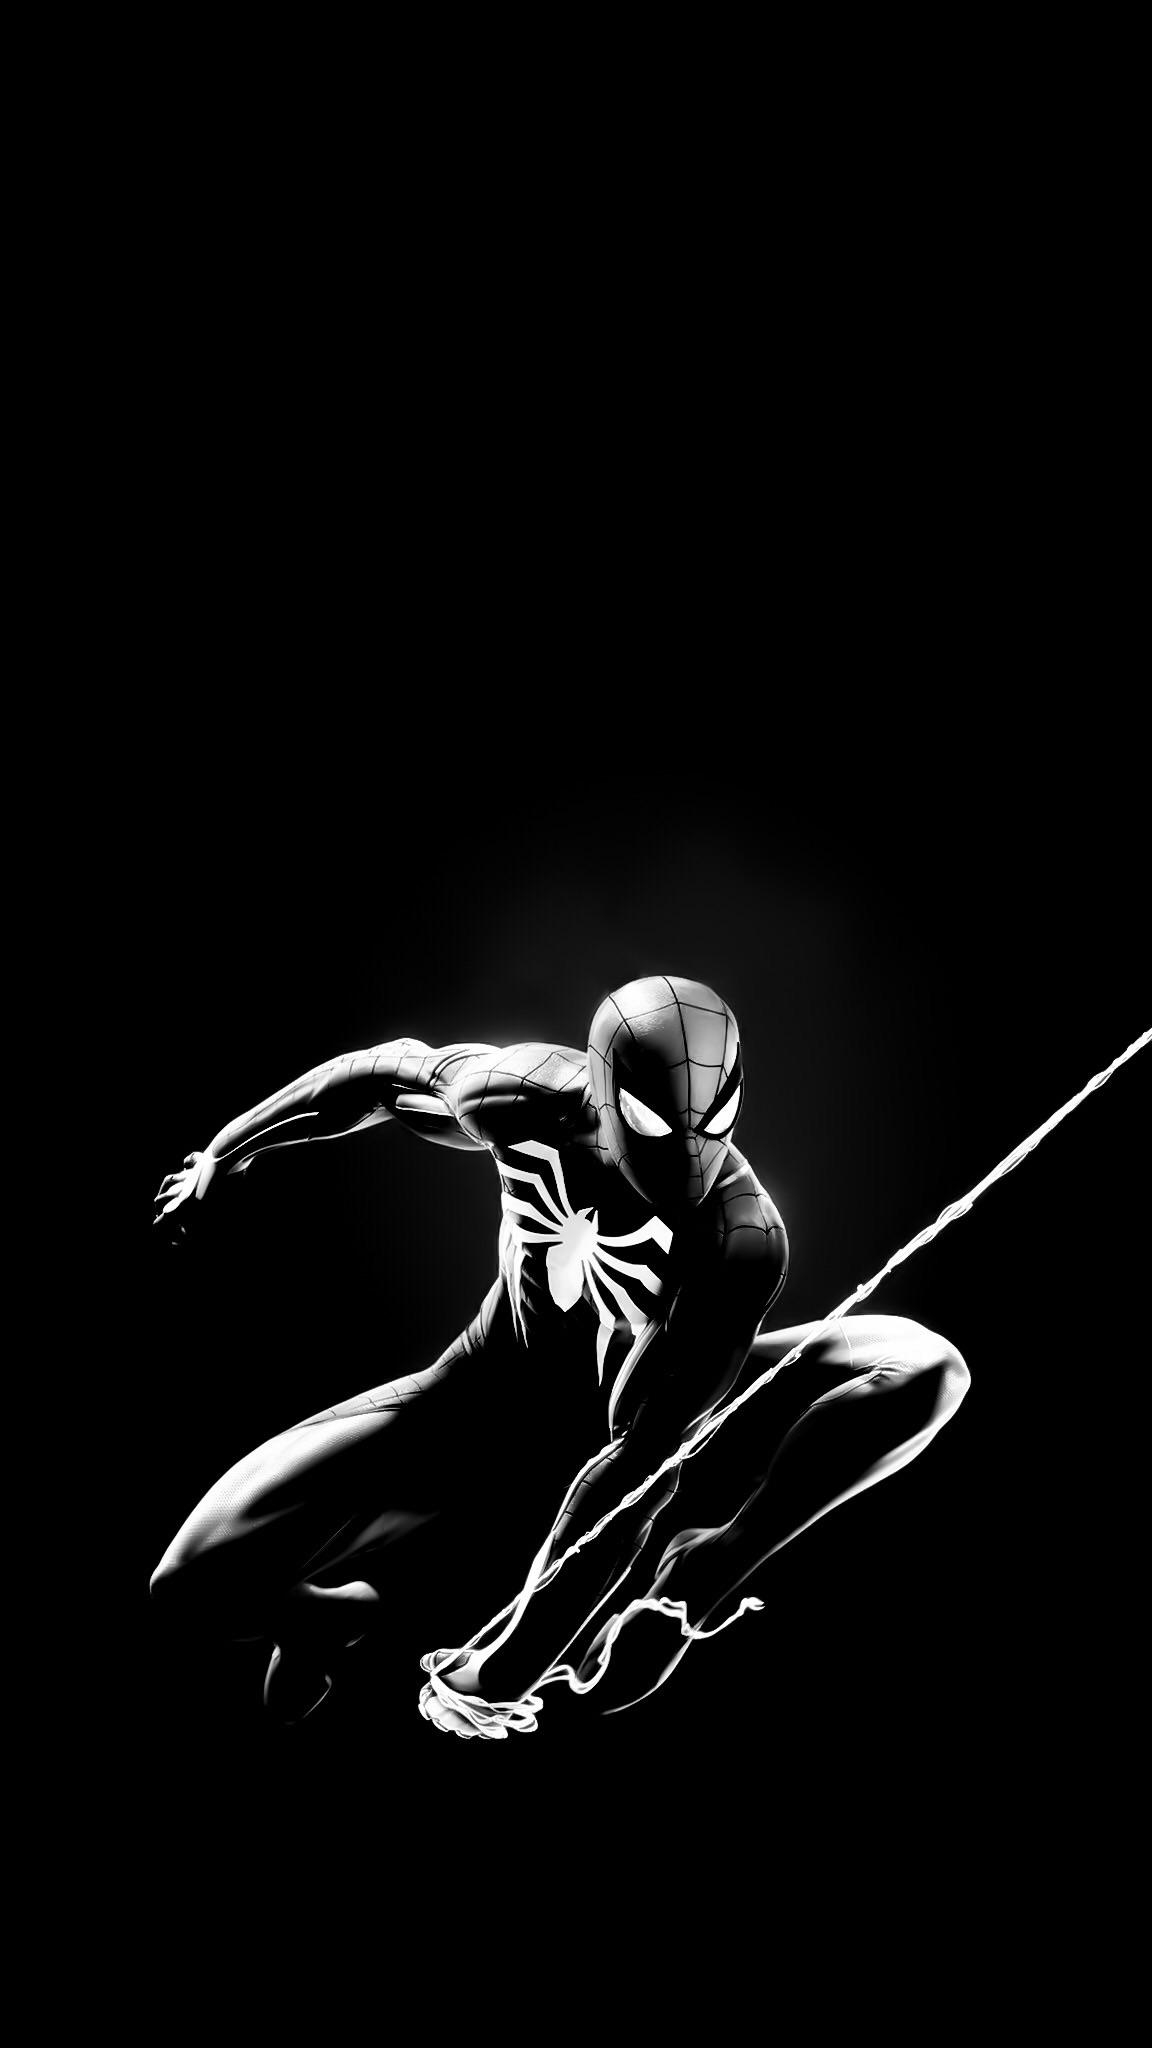 Spider Man Wallpaper I Made For My Phone